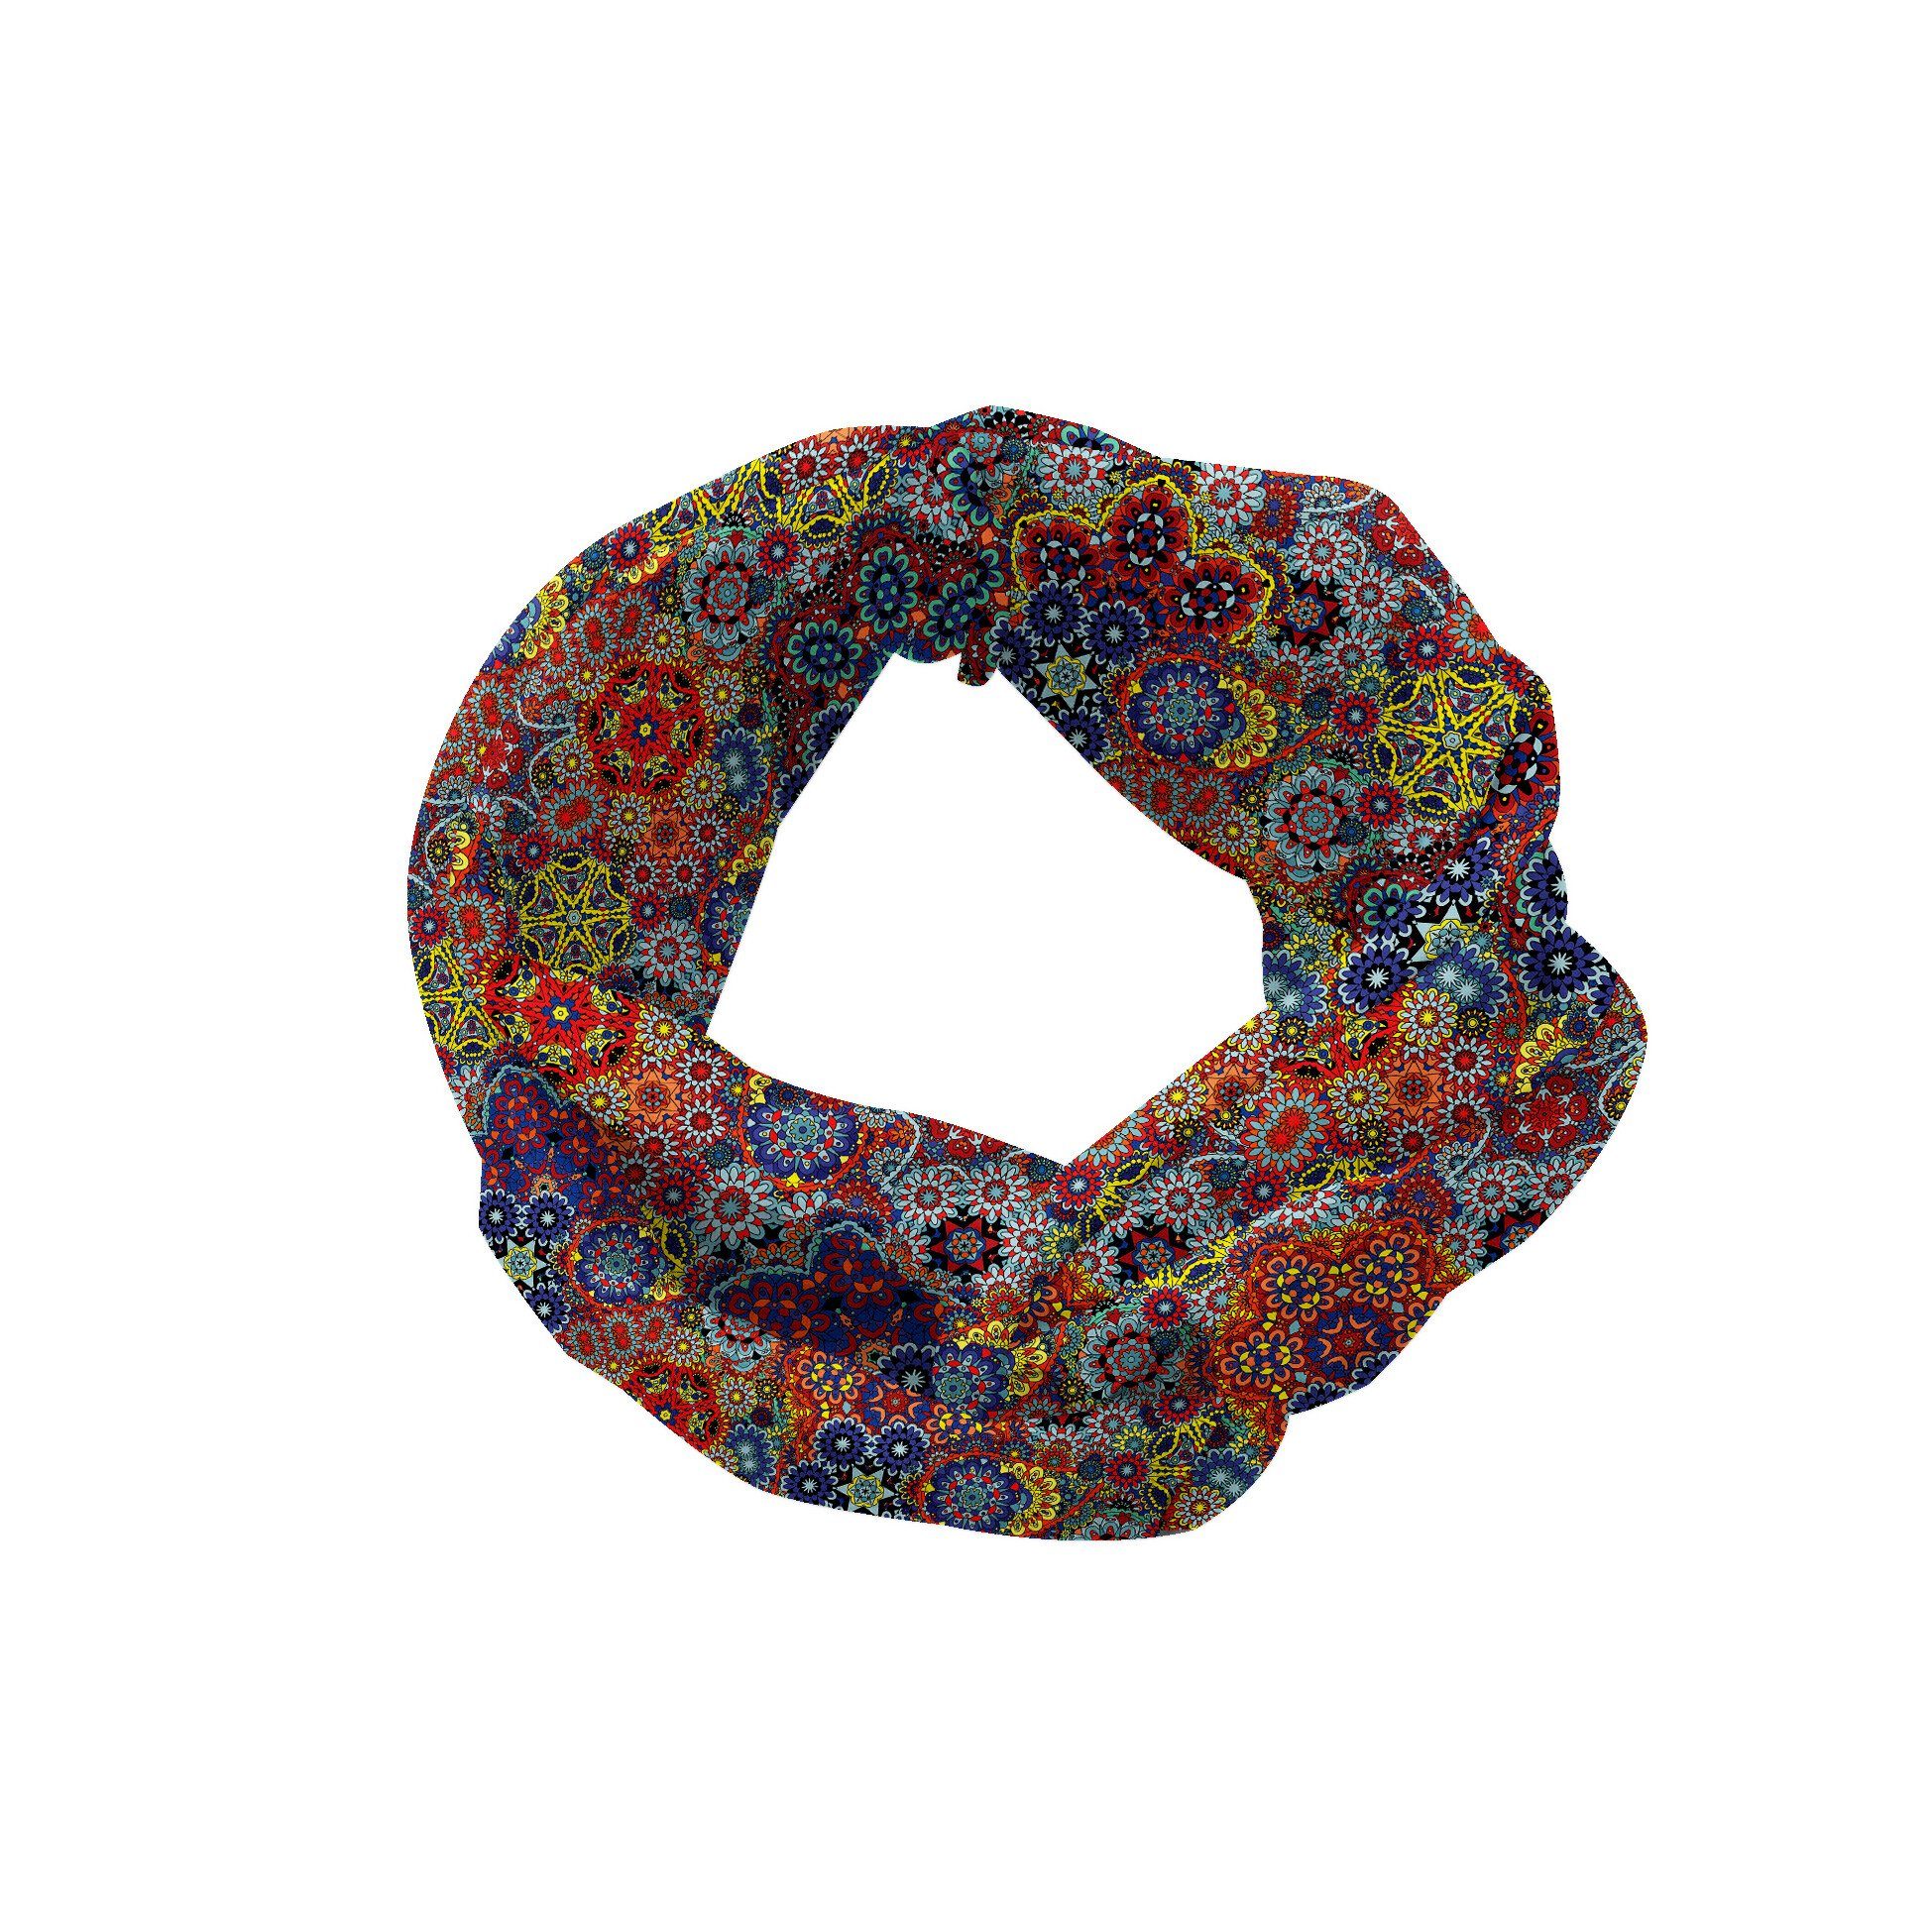 Combined Angenehme Stirnband alltags accessories Abakuhaus Elastisch Nested und Paisley Paisley